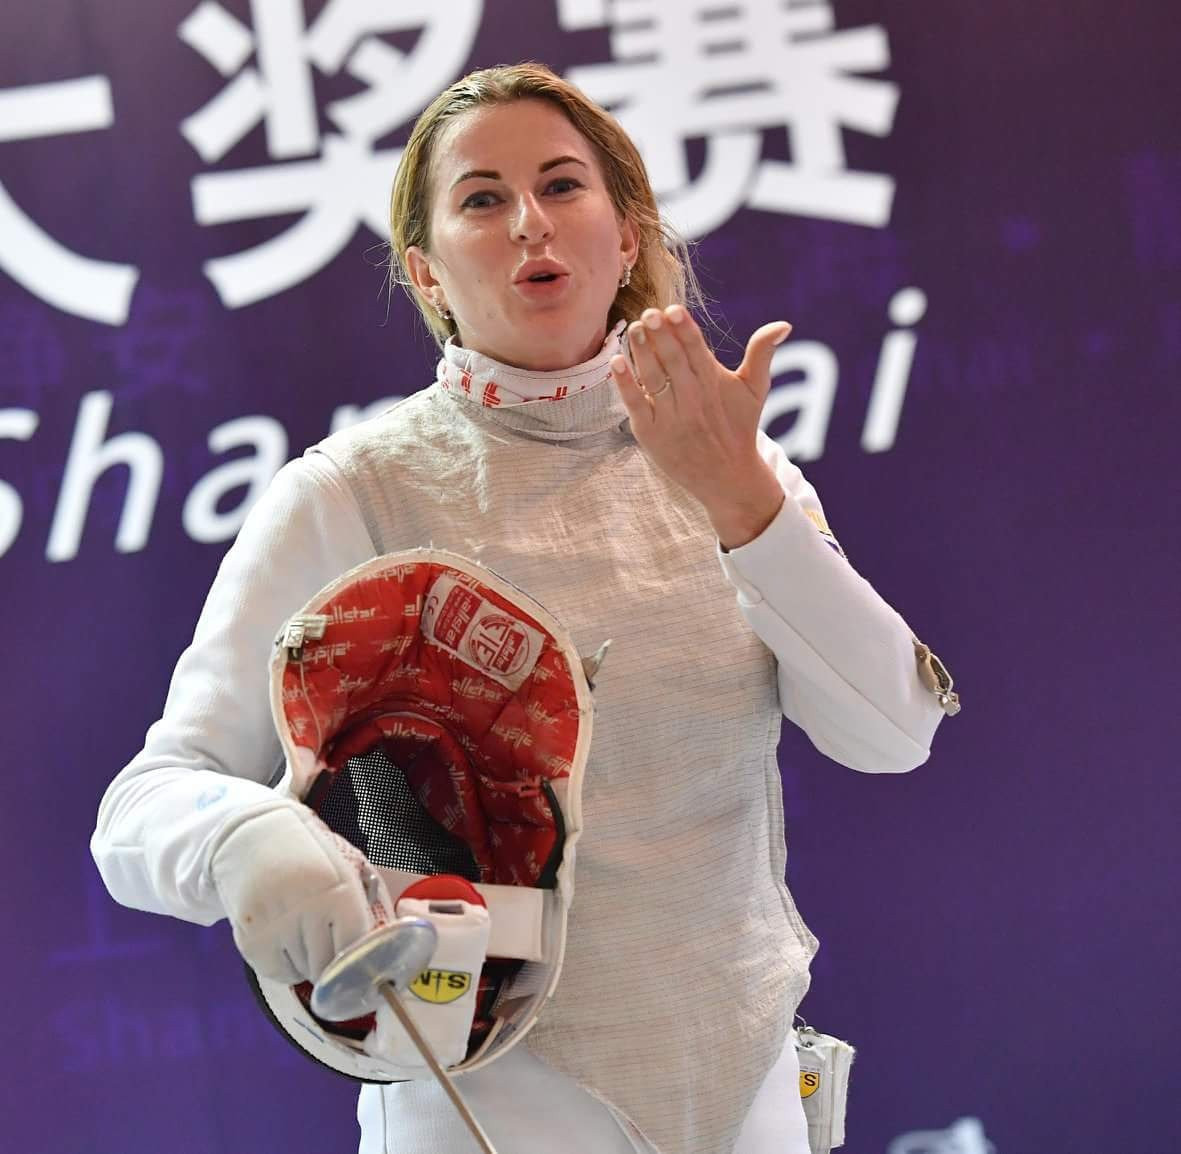 Olympic champion Deriglazova comes out on top at FIE Foil Grand Prix in Shanghai